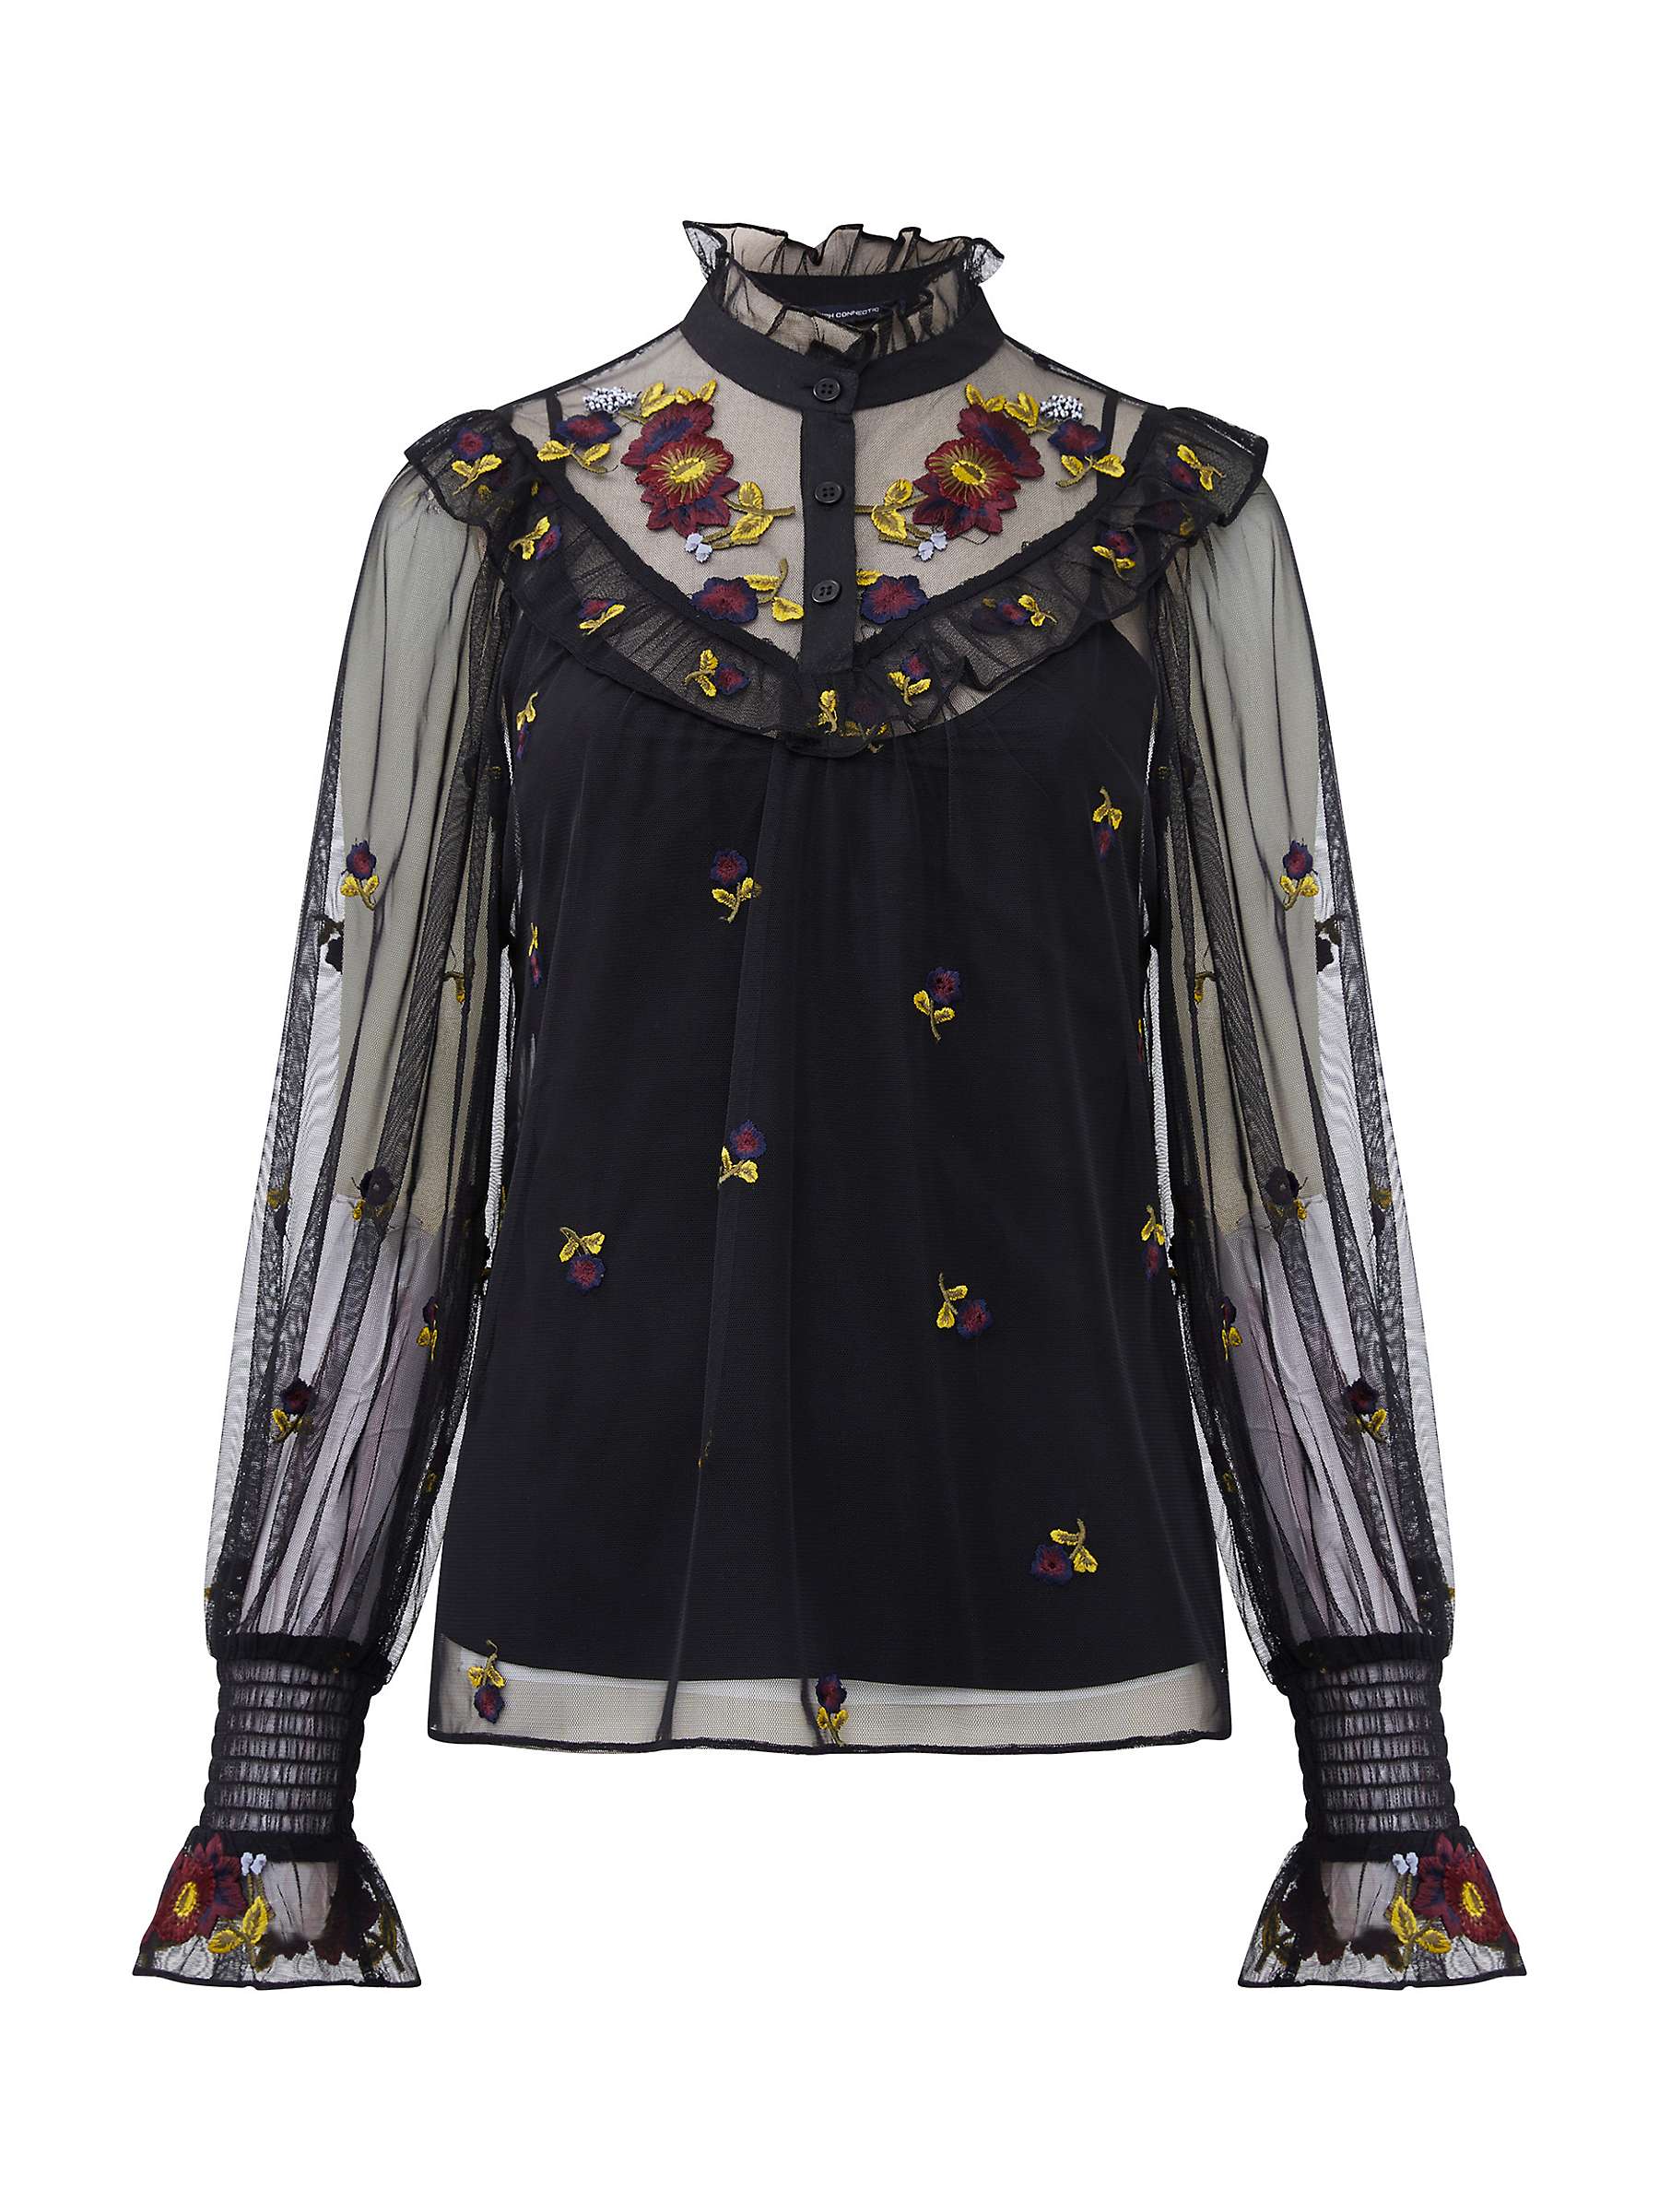 Buy French Connection Camielle Embroidered Shirt, Black/Multi Online at johnlewis.com